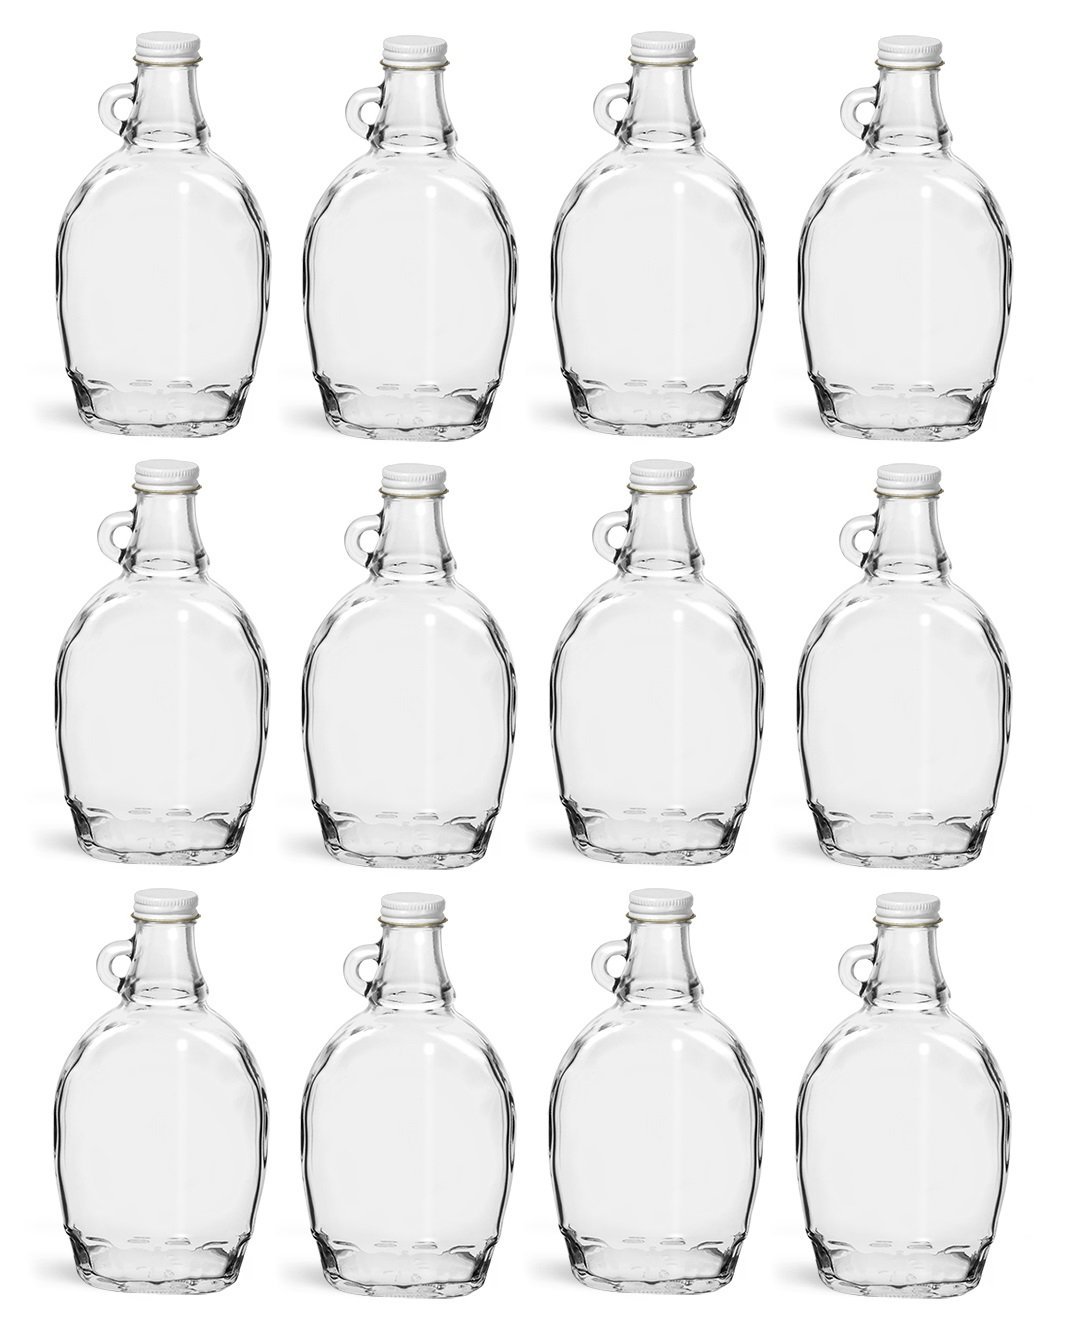 NMS 12 Ounce Glass Maple Syrup Bottles with Loop Handle & White Metal Lids  - Case of 12